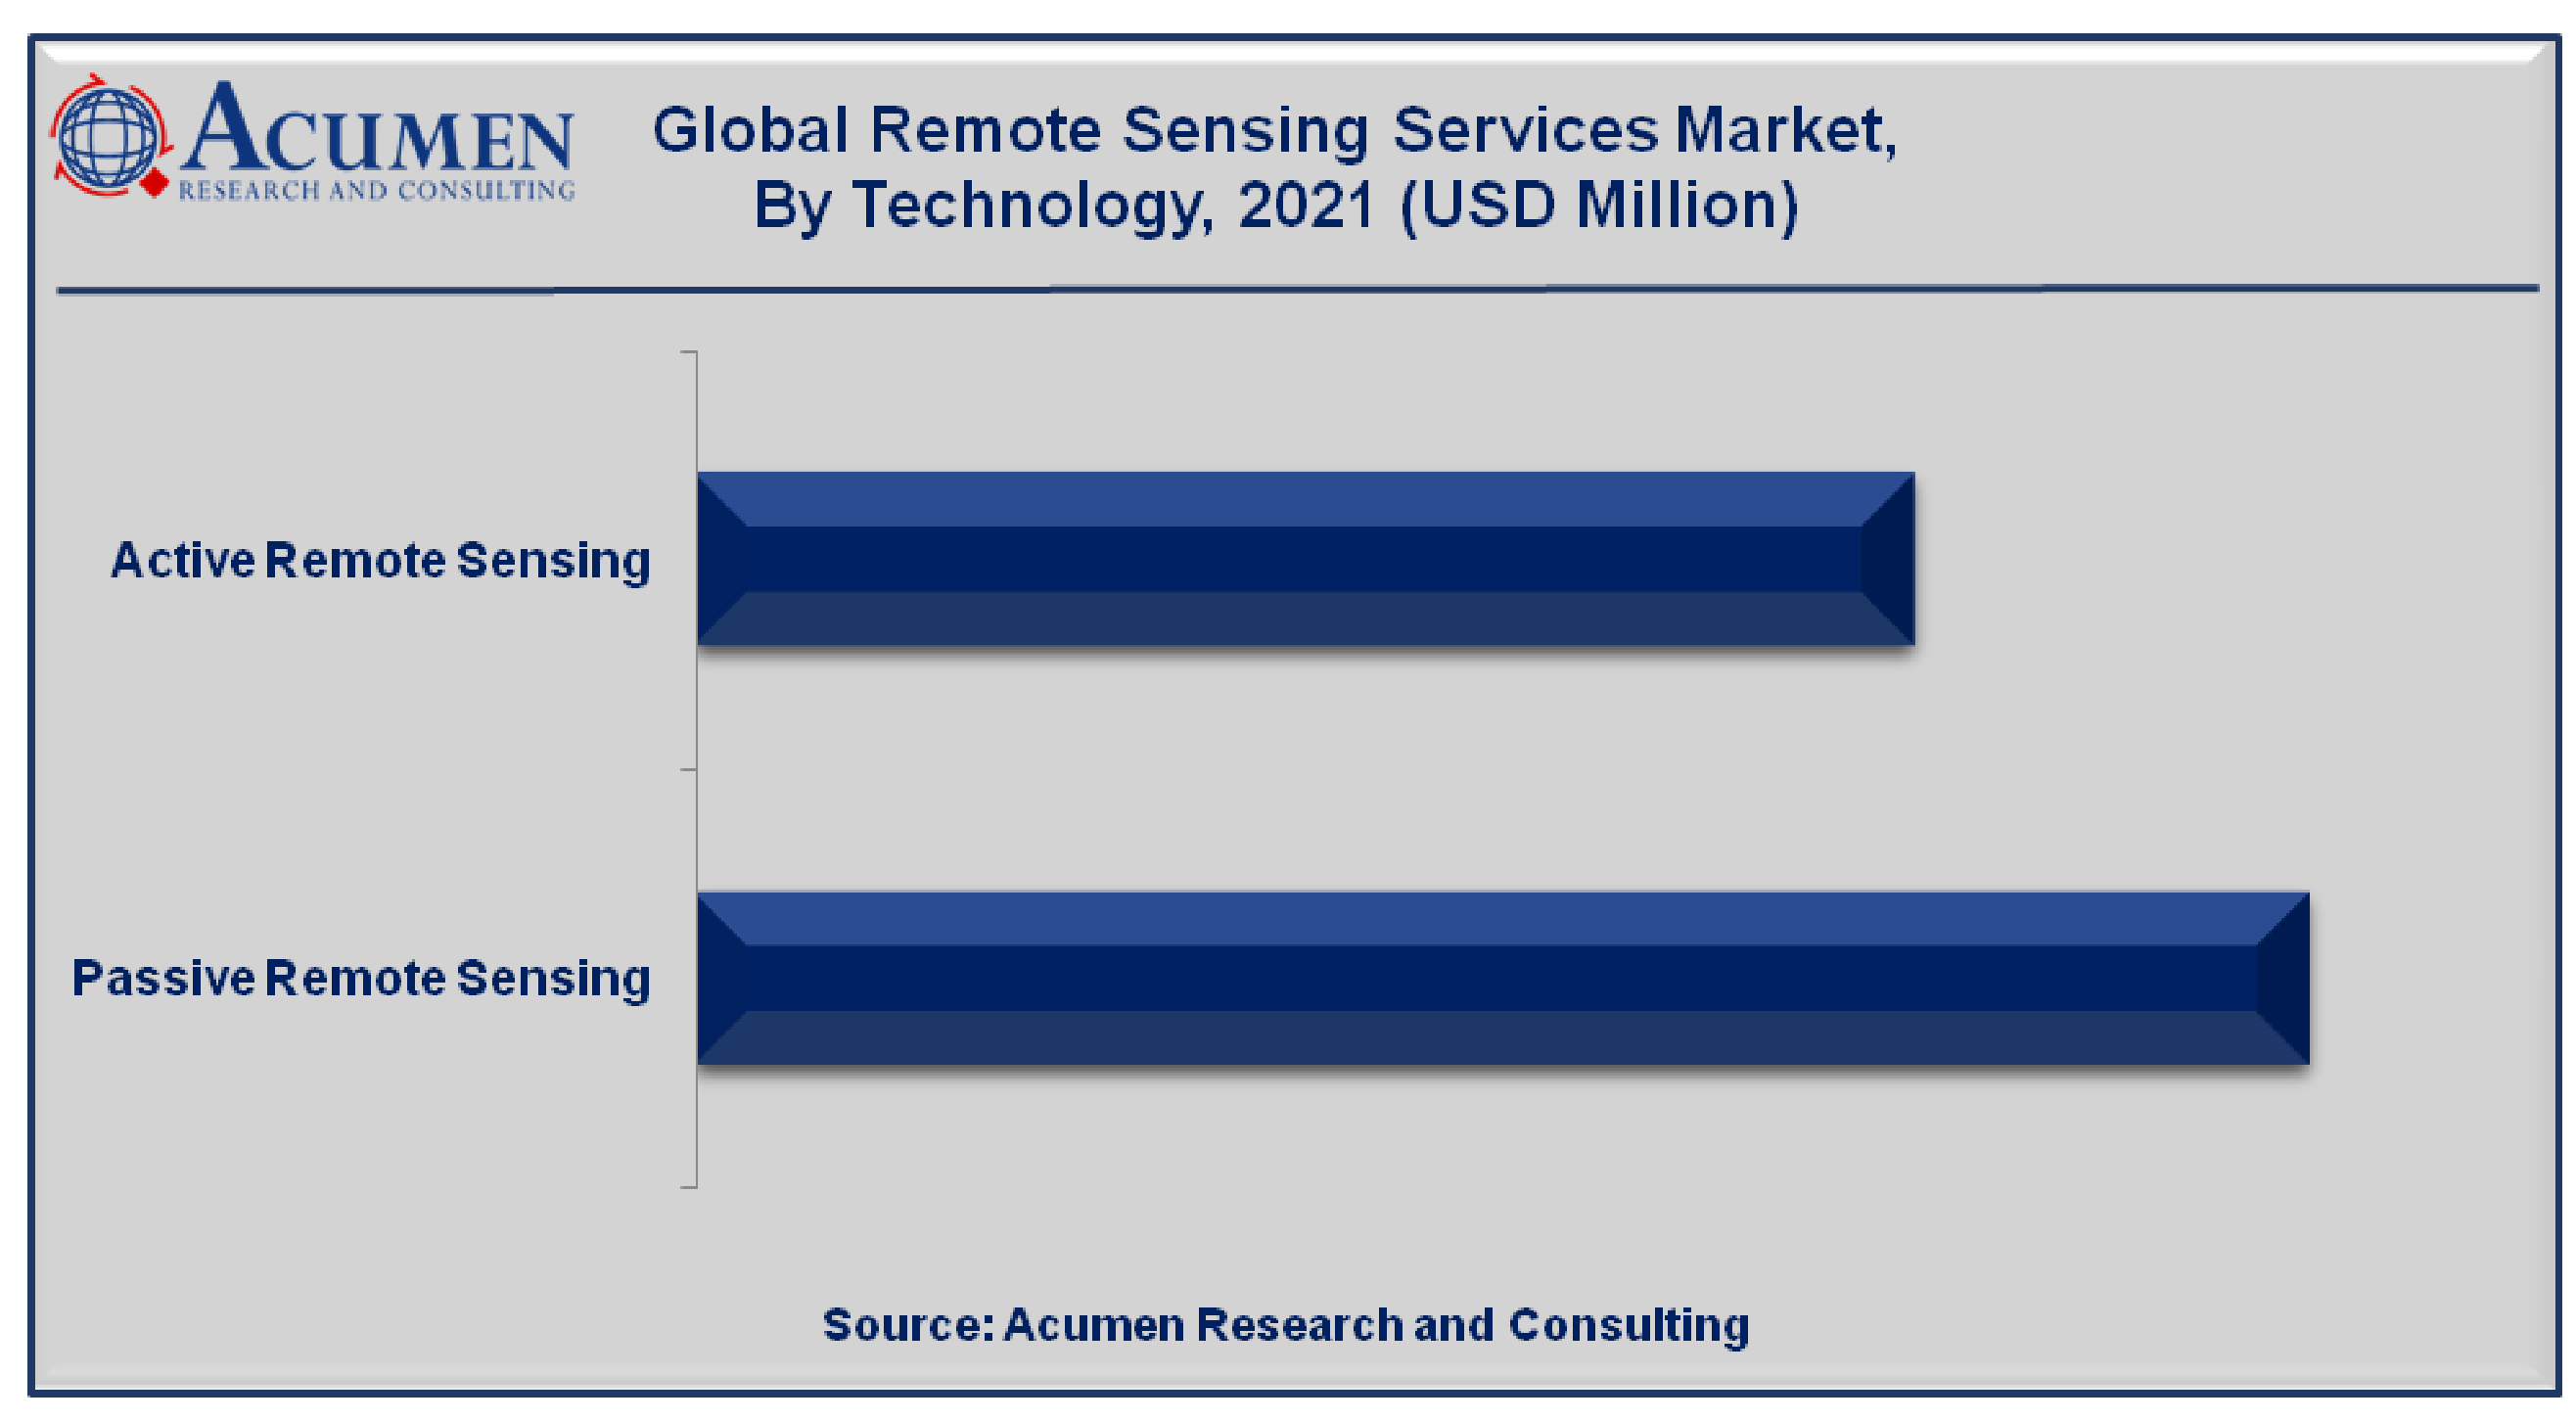 Remote Sensing Services Market Size is projected to reach a market size of USD 64,375 Million by 2030 growing at a CAGR of 15.2%